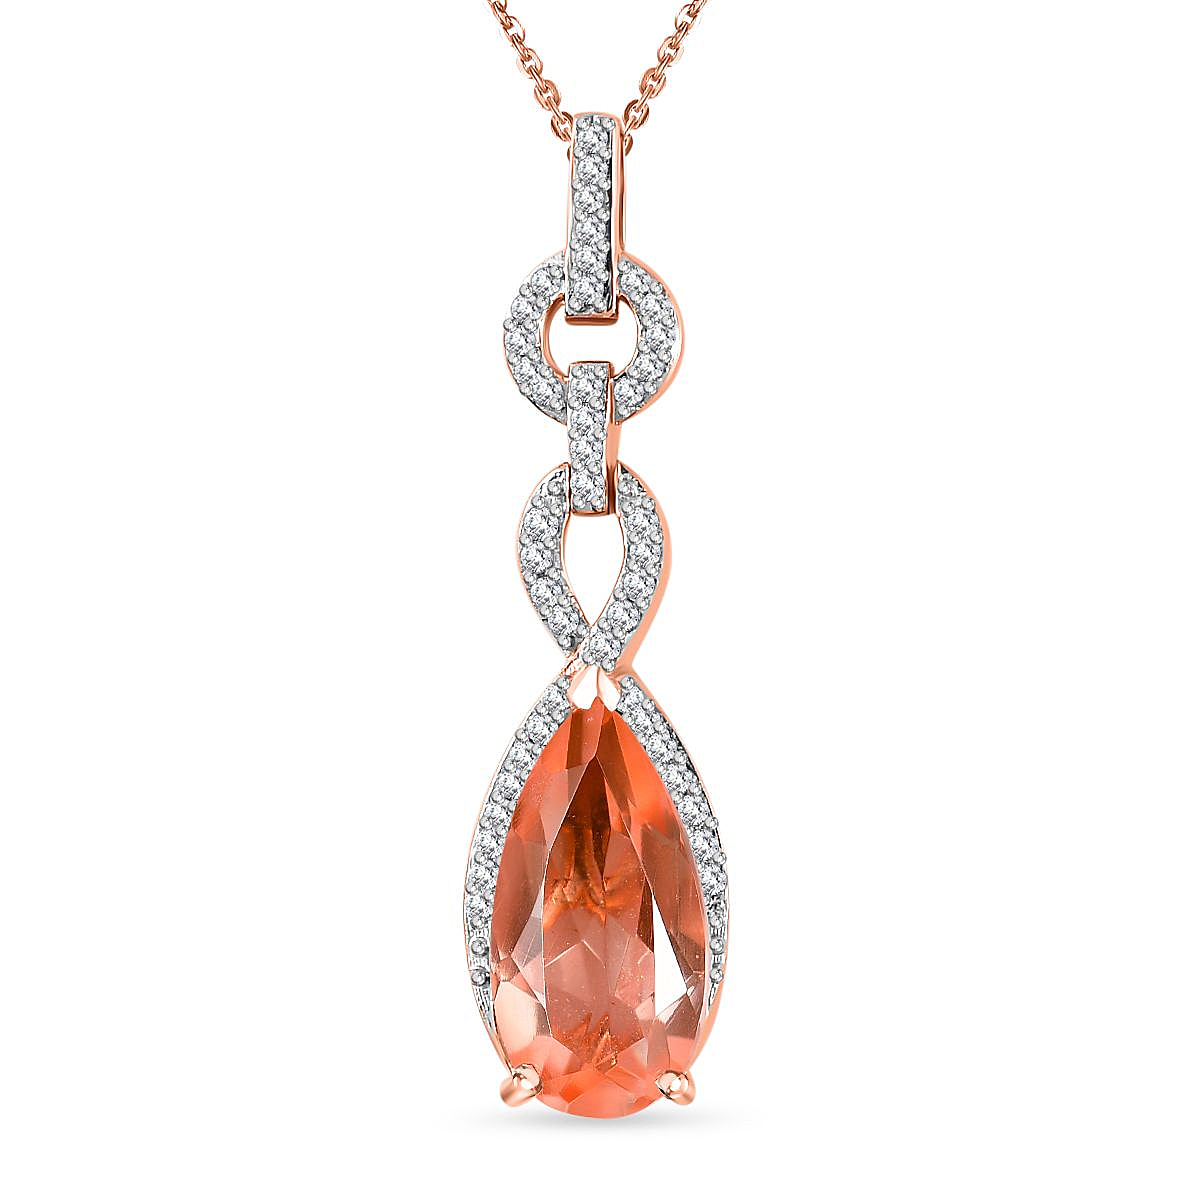 Morganite Color Quartz & Natural Zircon Pendant with Chain (Size 20) in 18K Rose Gold Vermeil Plated Sterling Silver 3.40 Ct, Silver Wt 5.40 GM